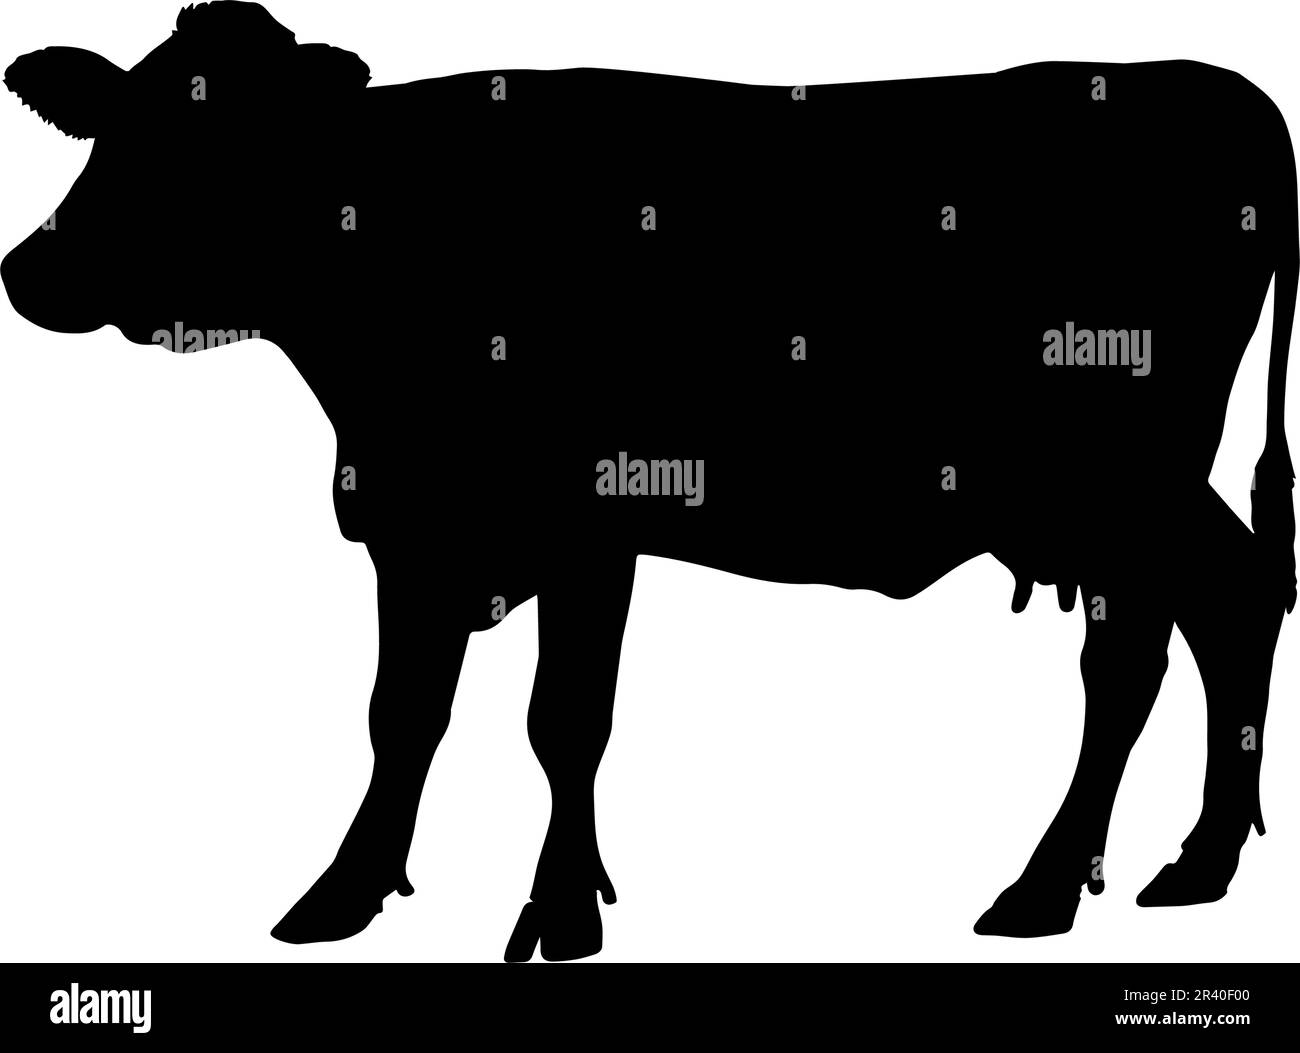 Cow silhouette isolated on white background. vector illustration Stock Vector